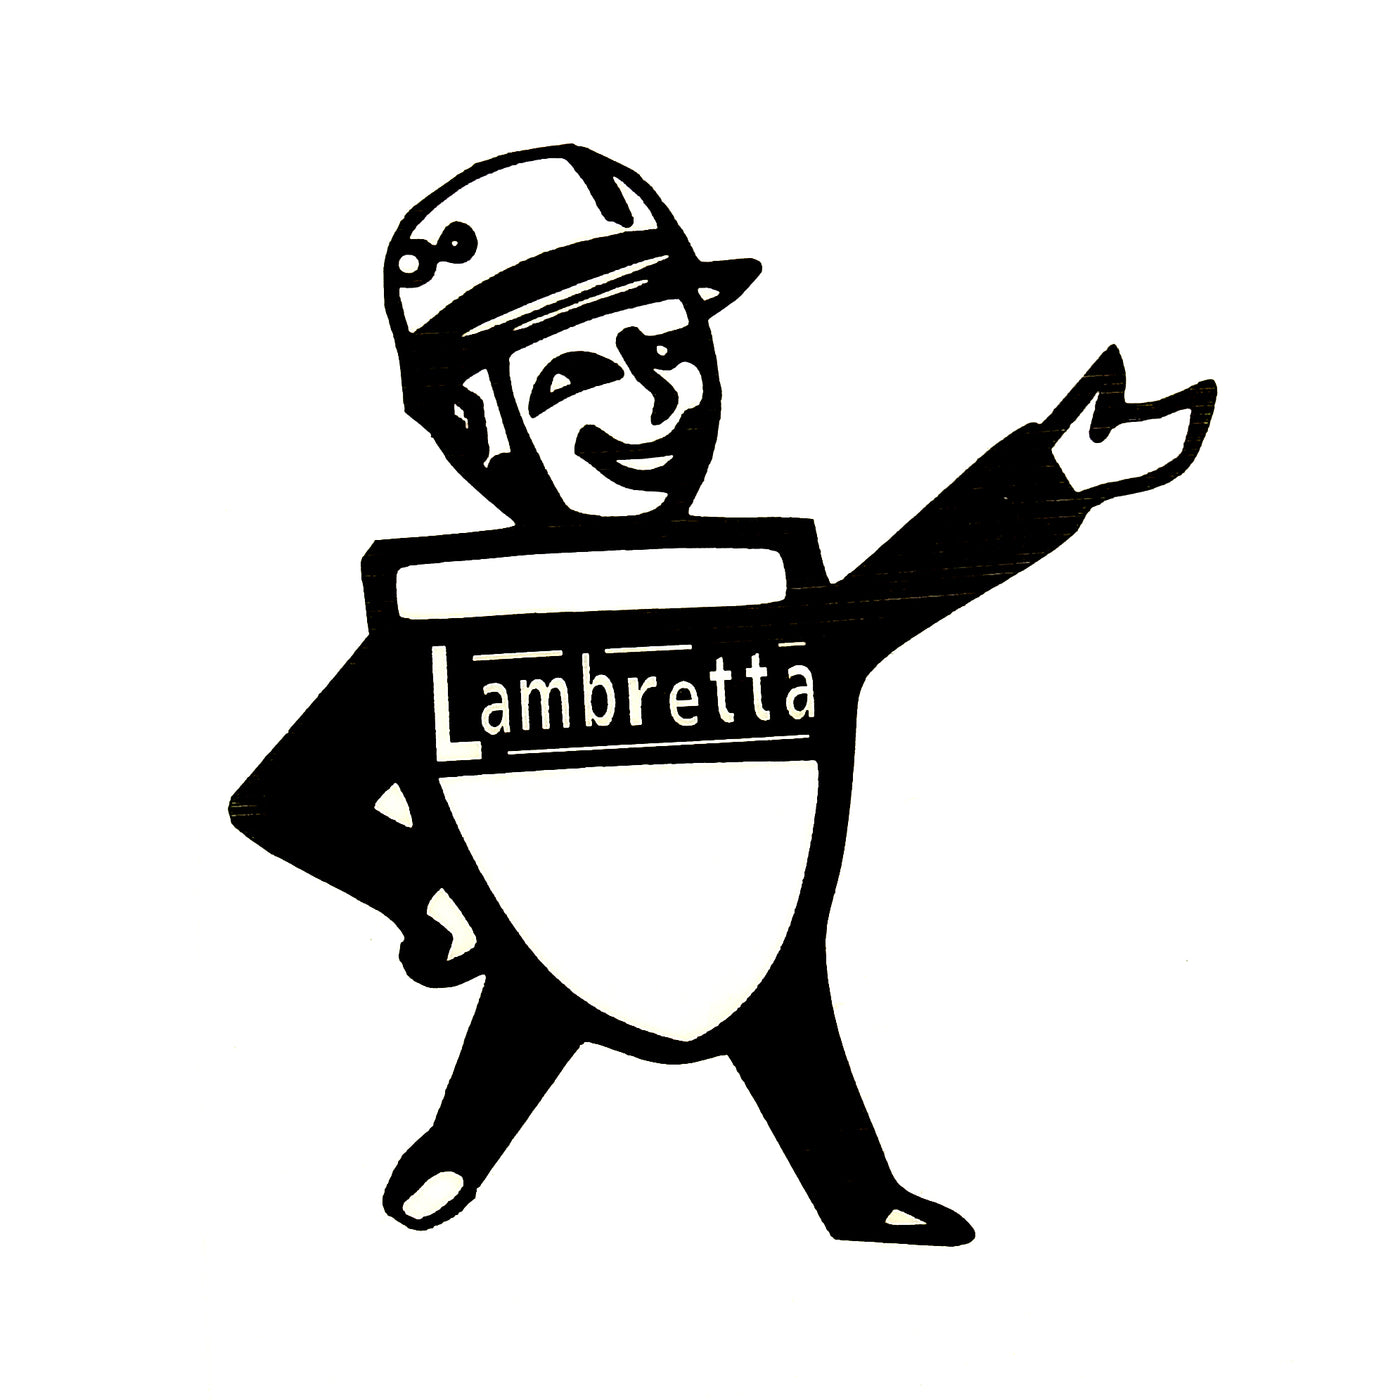 Lambretta Badges, Stickers, Patches and Keyrings*